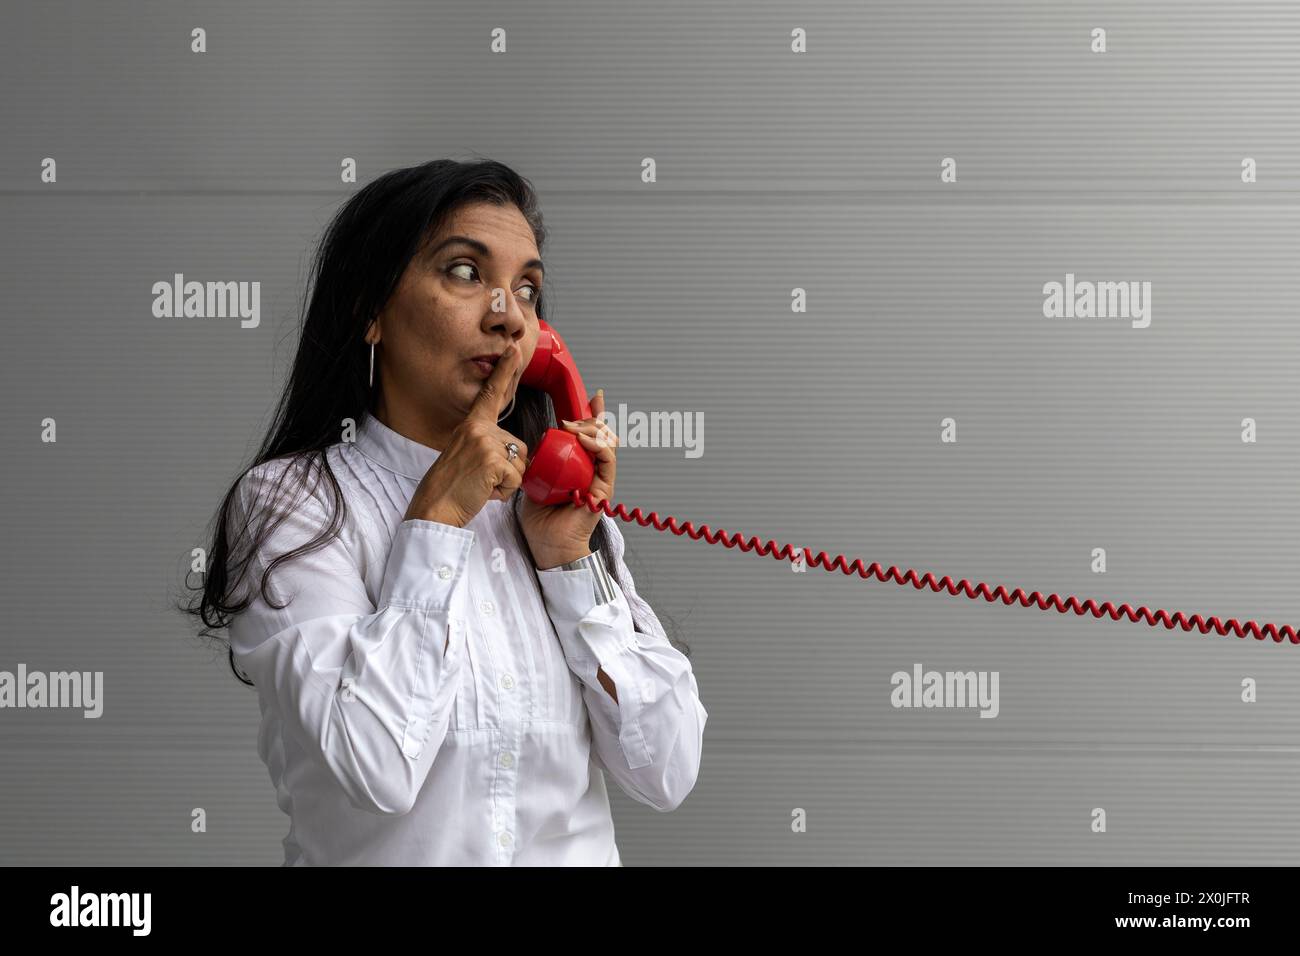 Latin American adult woman with a red headset posing on camera. Vintage technology concept Stock Photo